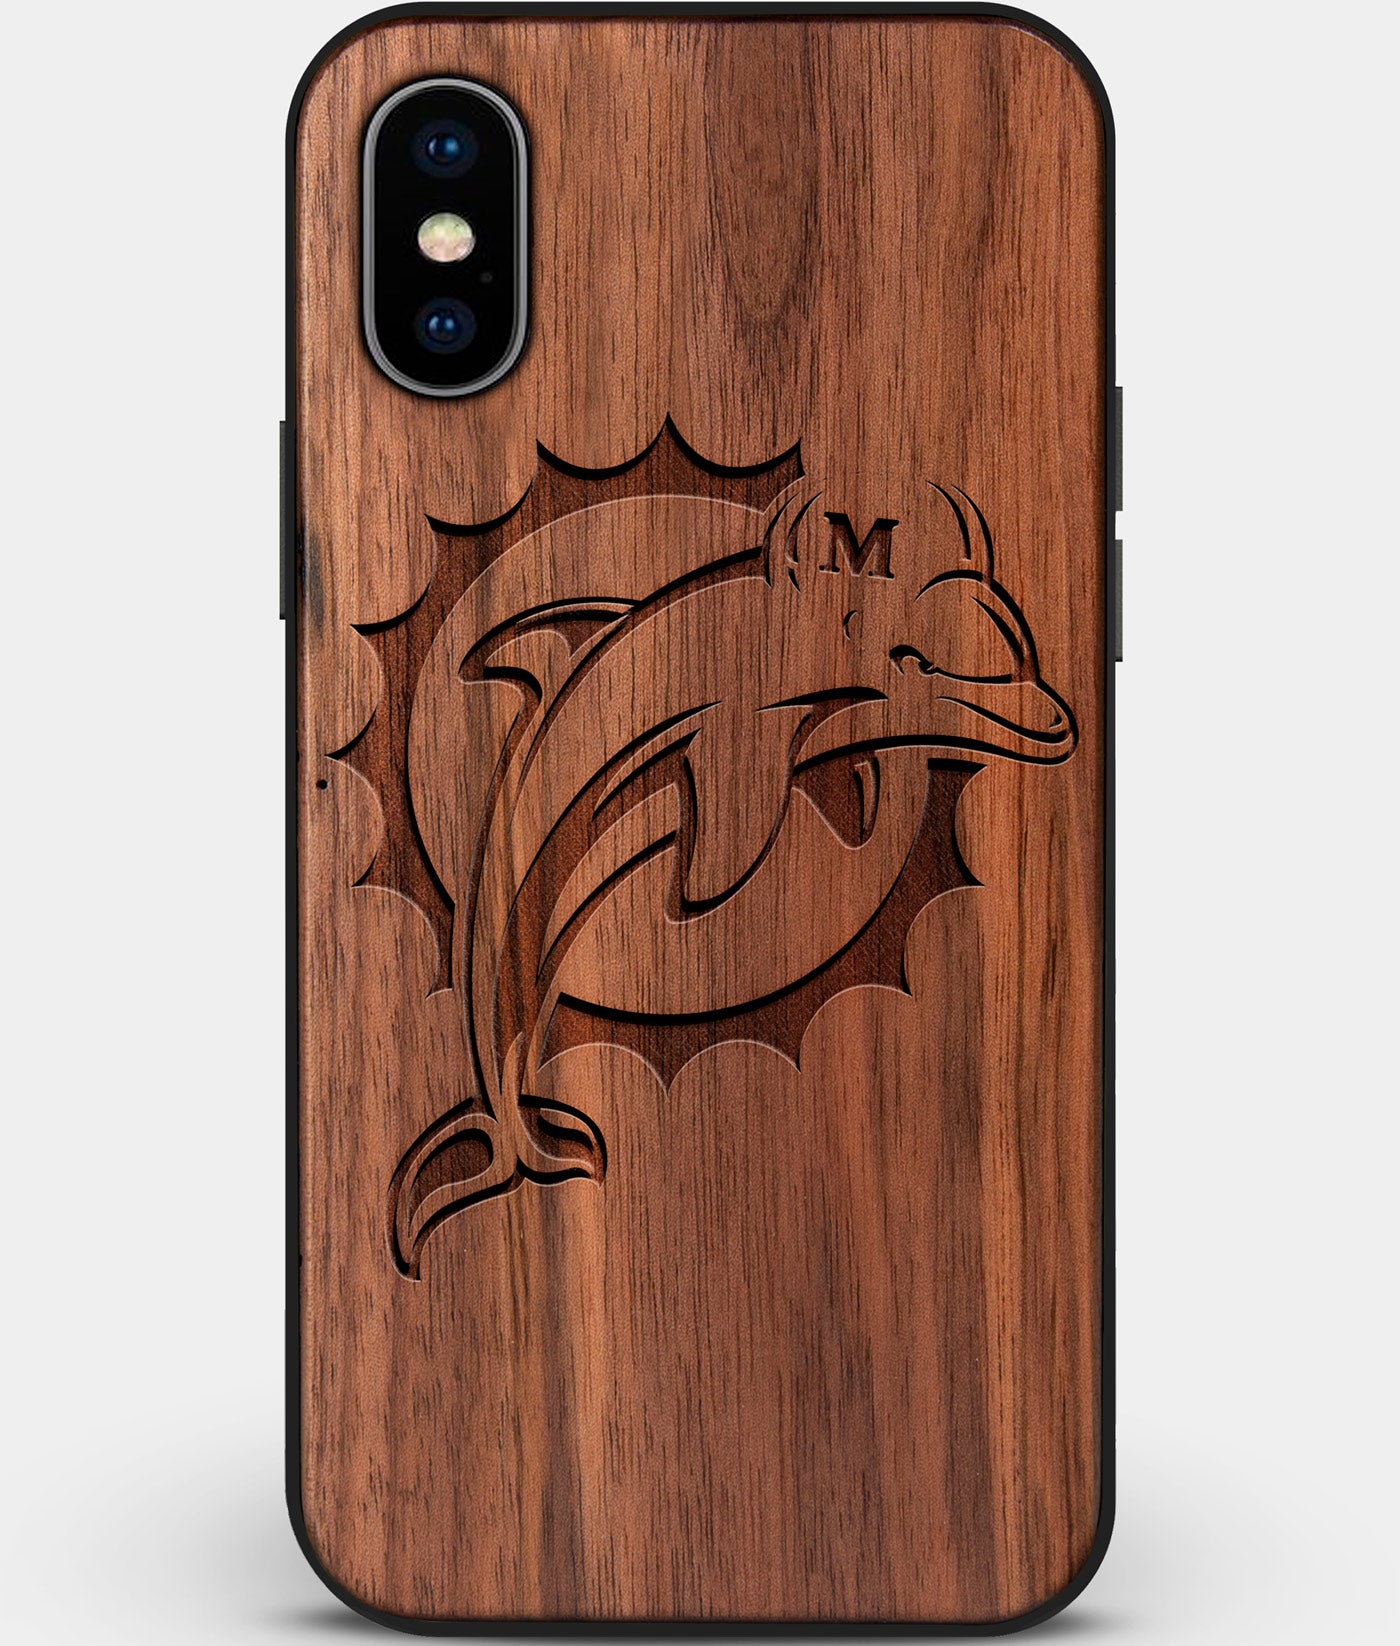 Custom Carved Wood Miami Dolphins iPhone X/XS Case | Personalized Walnut Wood Miami Dolphins Cover, Birthday Gift, Gifts For Him, Monogrammed Gift For Fan | by Engraved In Nature